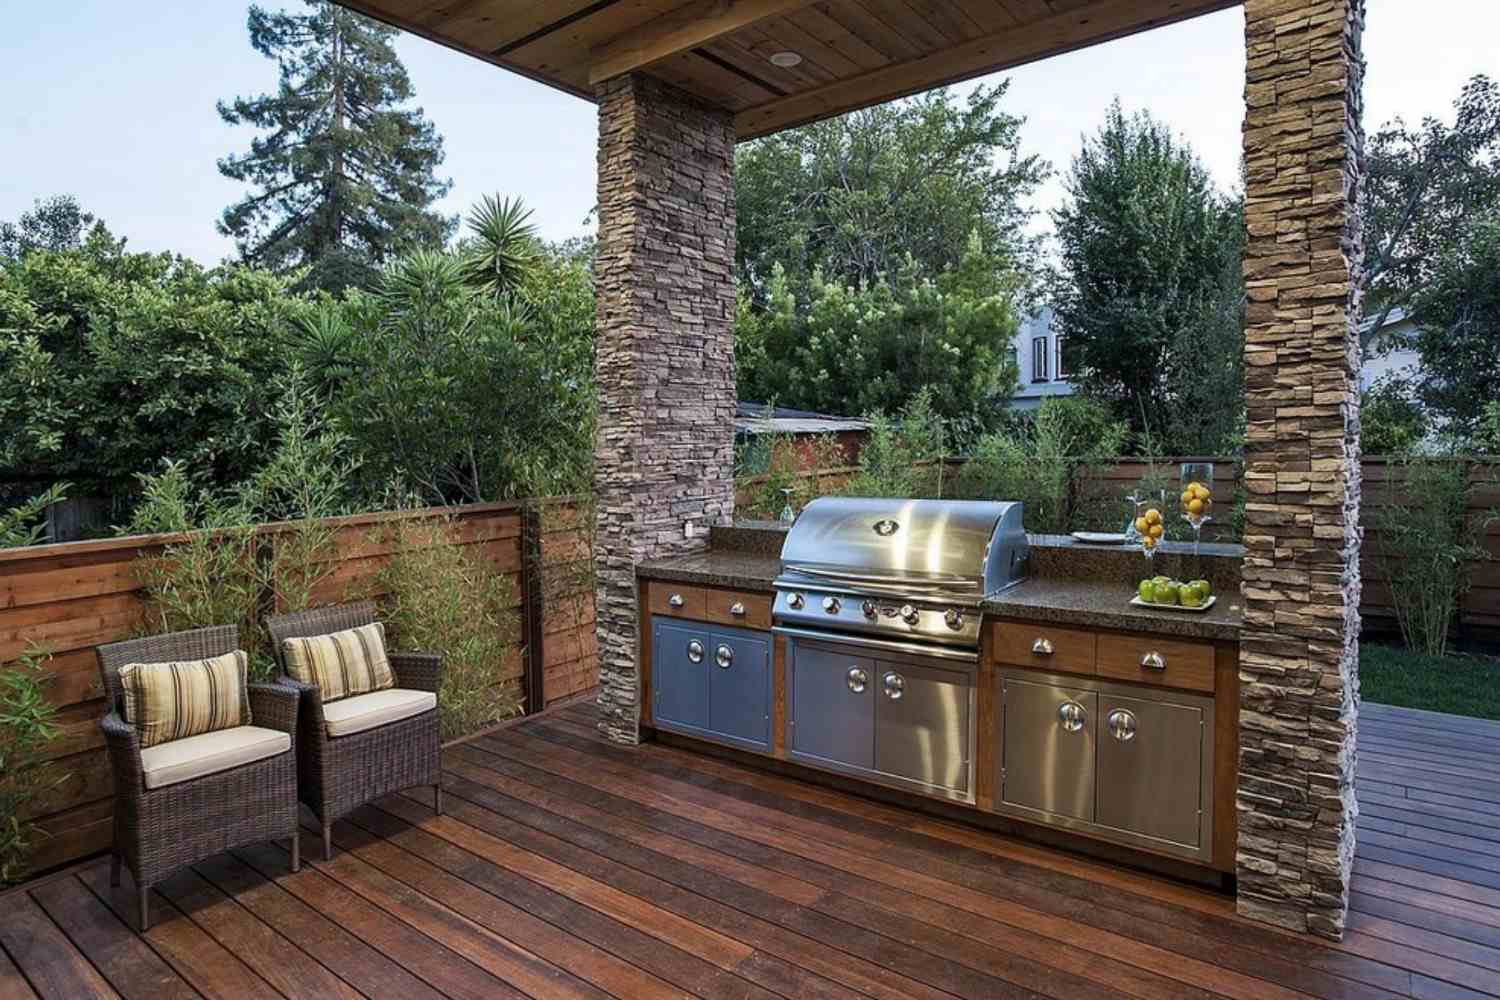 An Outdoor Kitchen Isn’t Complete Without a High-End Grill